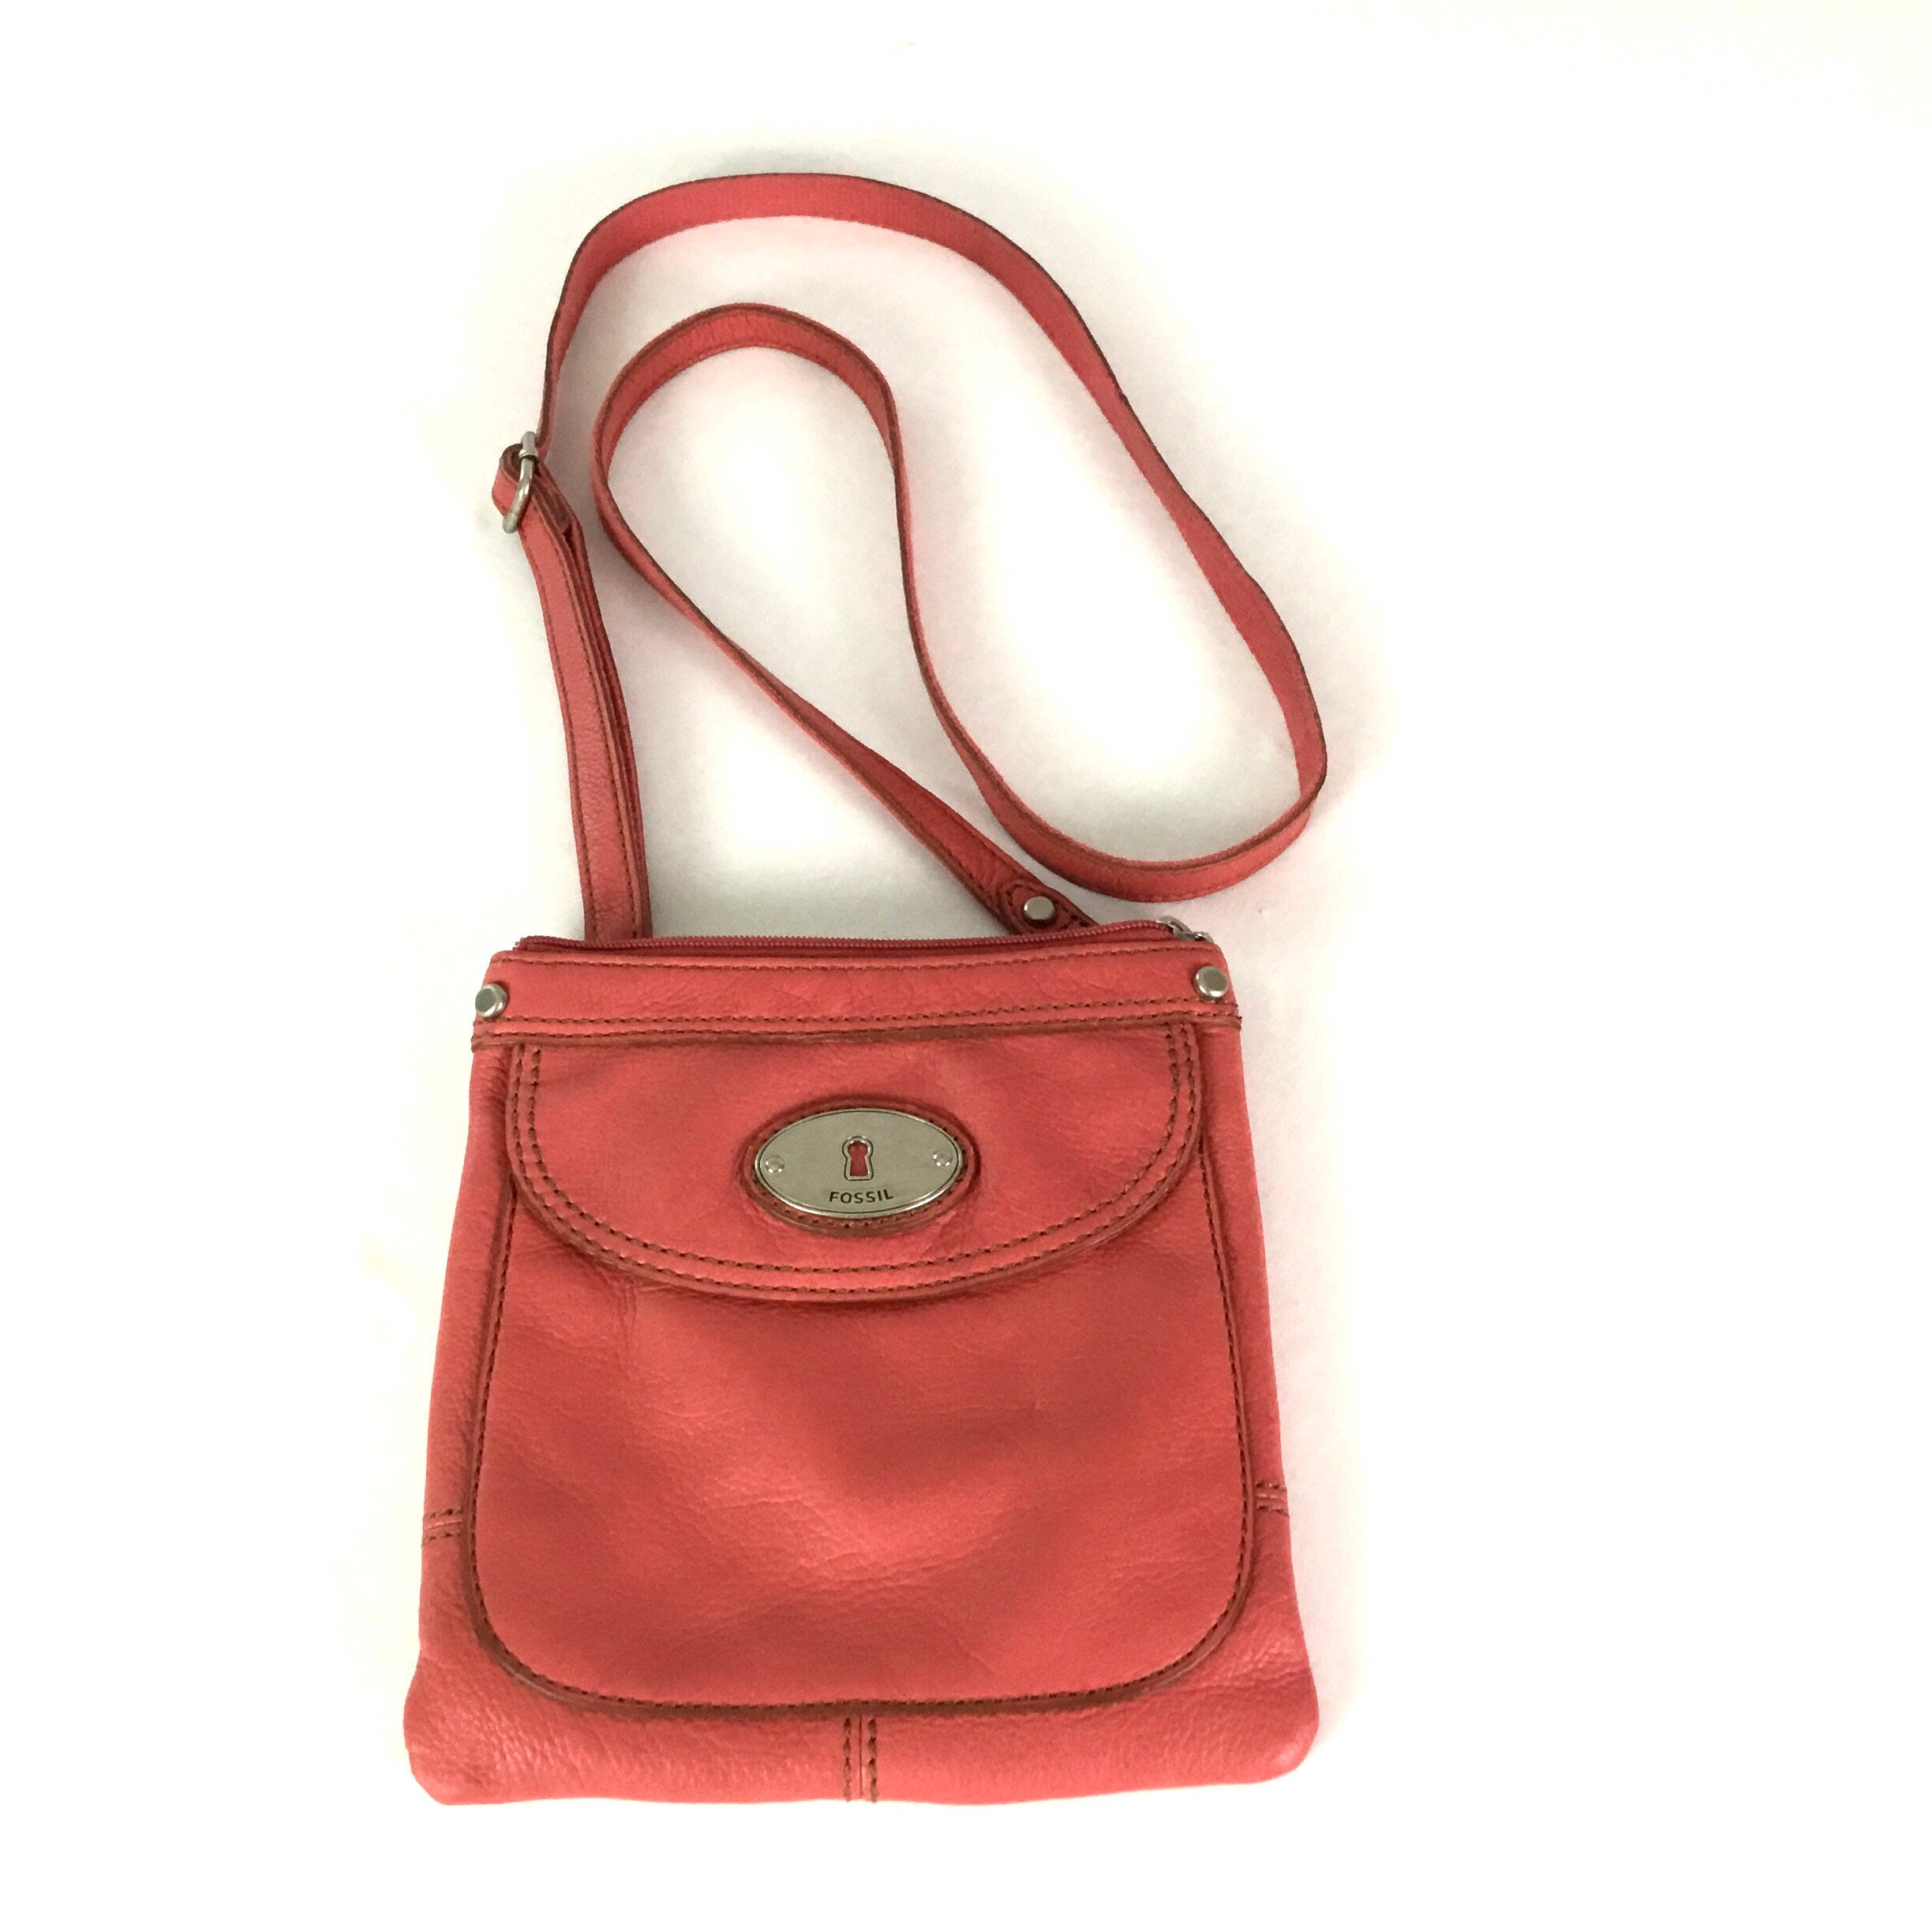 Fossil Saddle Style Shoulder Bag Purse Red Genuine Leather Y2K Stitching -  $25 - From Fmm